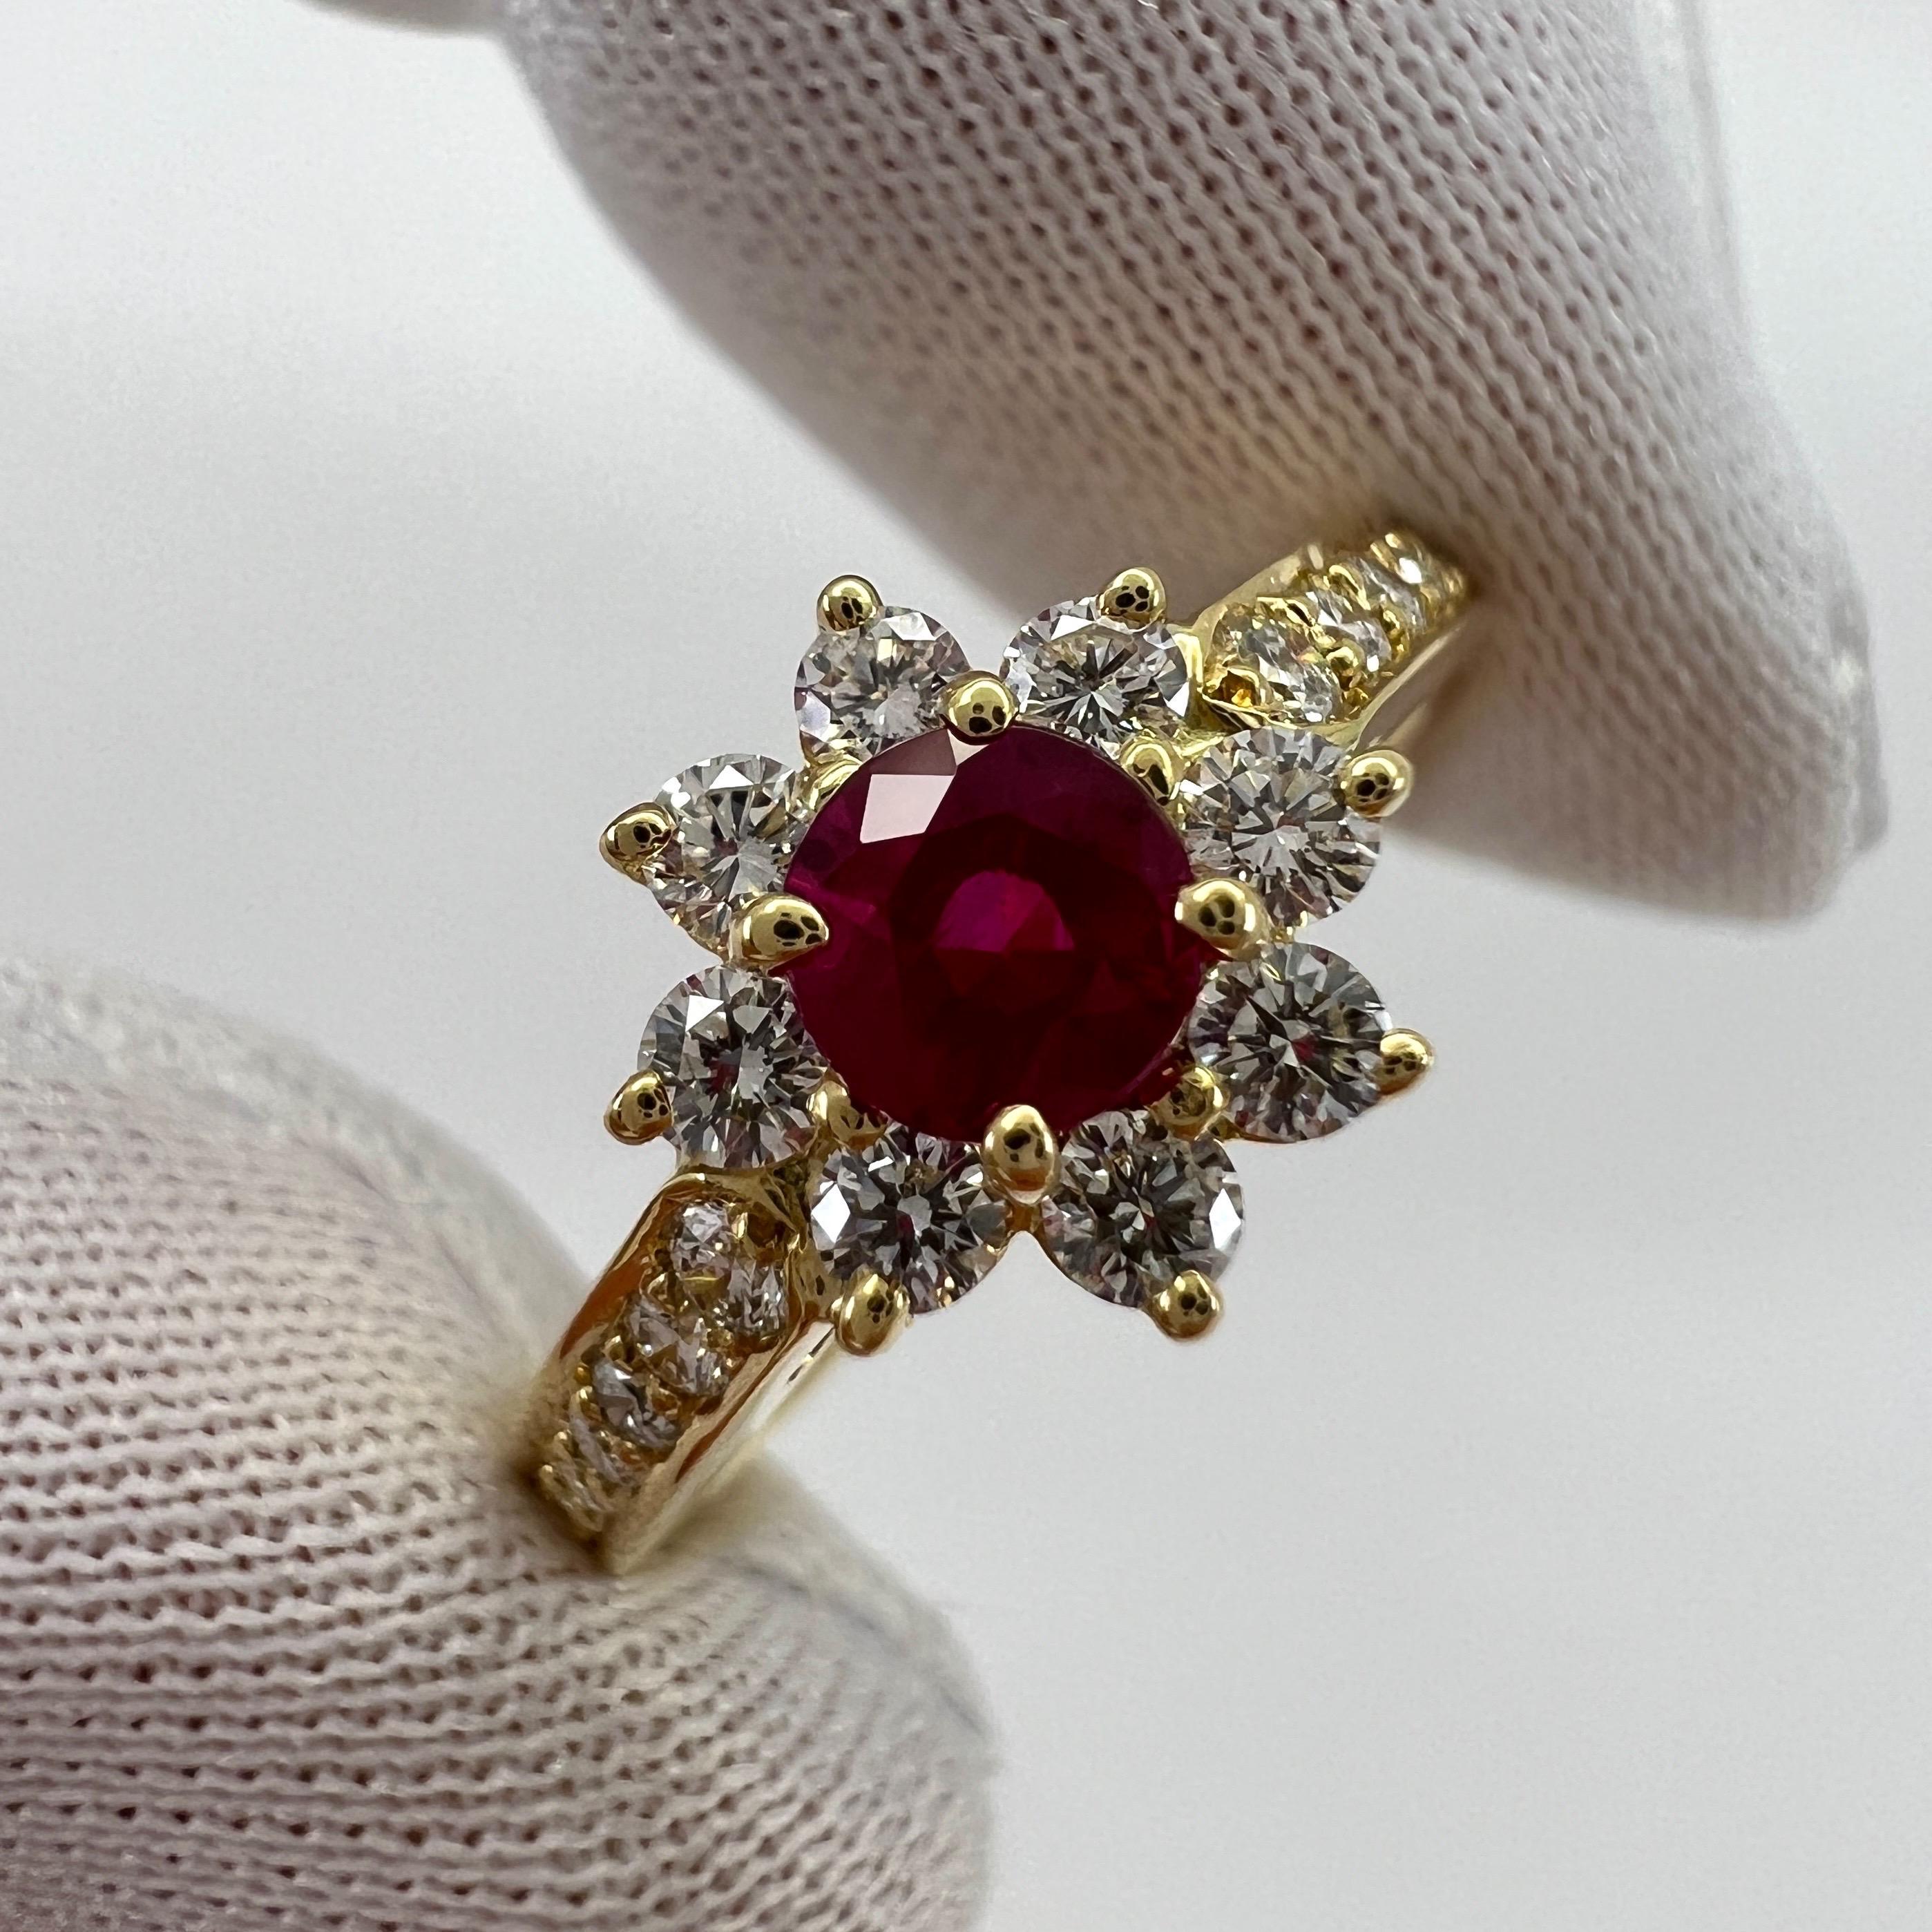 Rare Tiffany & Co. Ruby & Diamond Buttercup 18k Yellow Gold Ring.

A beautifully made yellow gold cluster ring set with a stunning 4.1mm (approx. 0.40t) deep vivid red round cut ruby. Superb colour, clarity and cut. 

Surrounded by x8 white diamonds